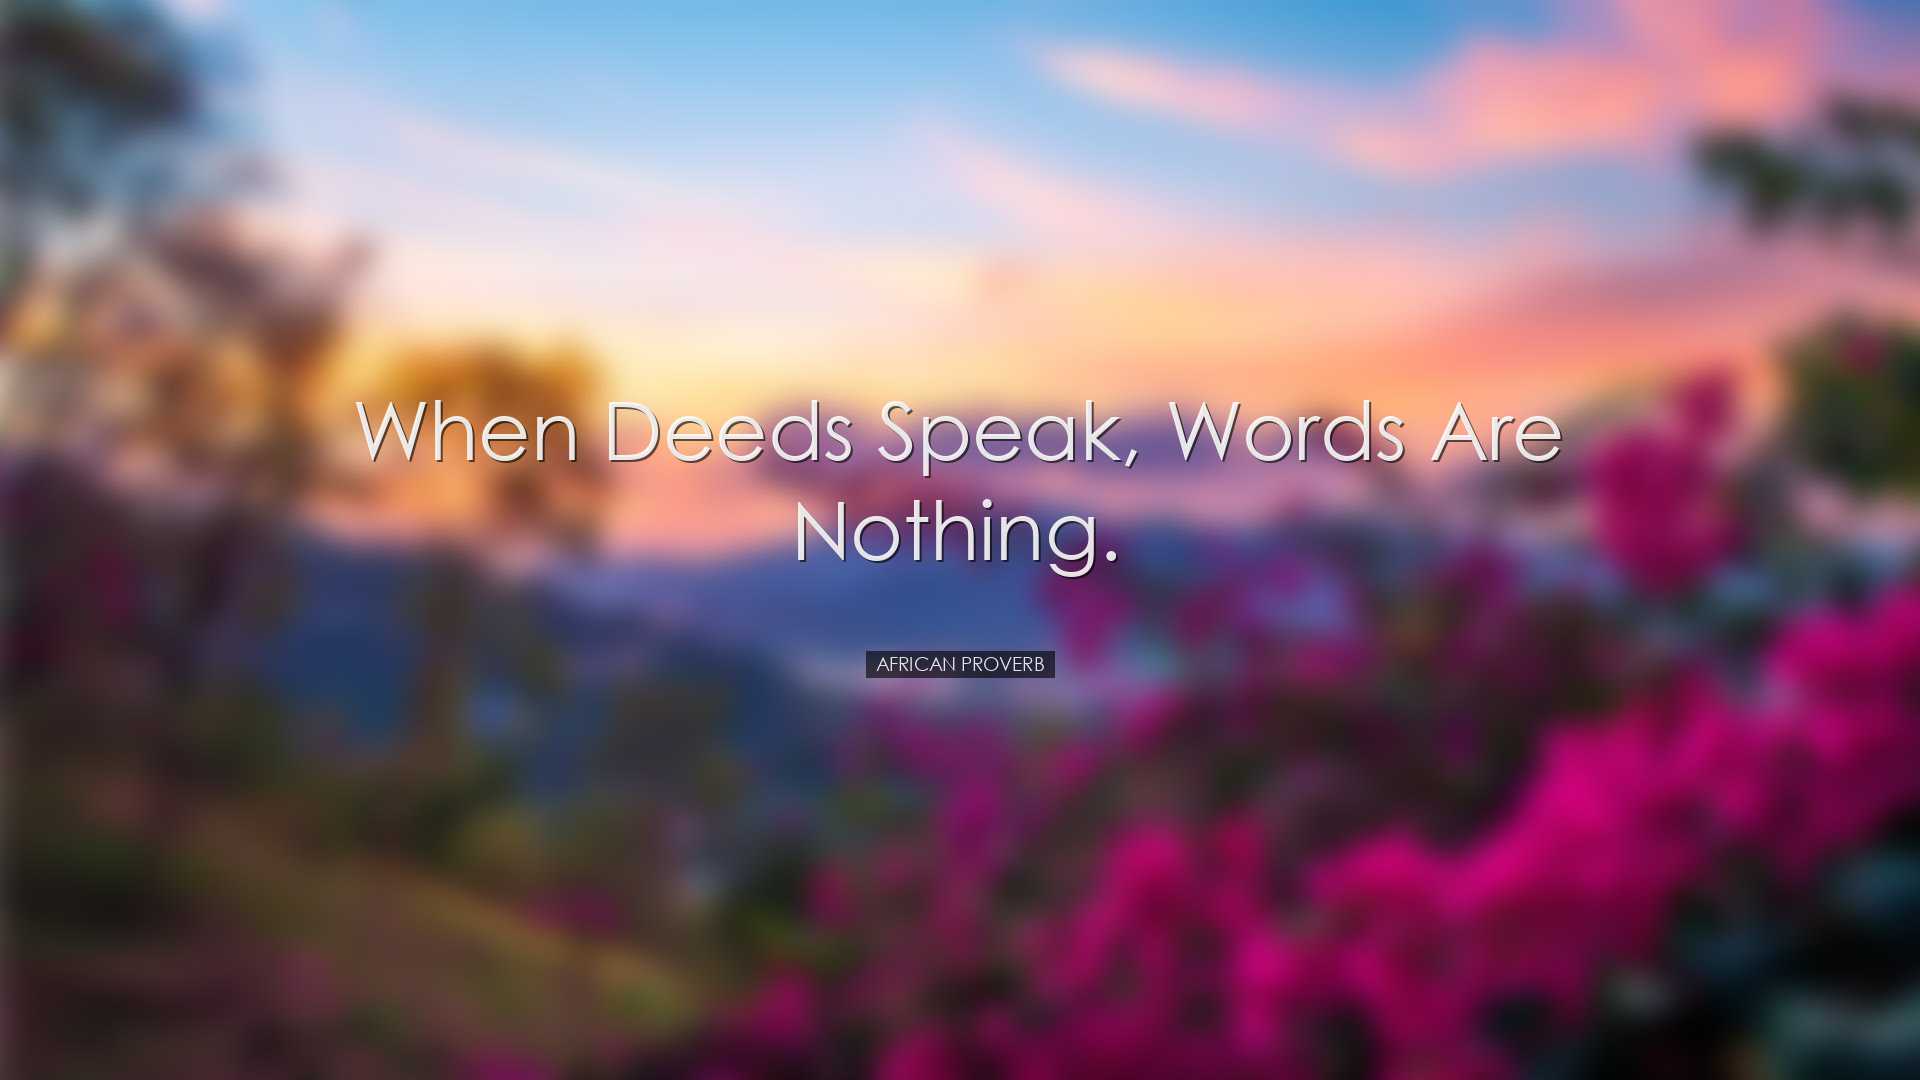 When deeds speak, words are nothing. - African Proverb